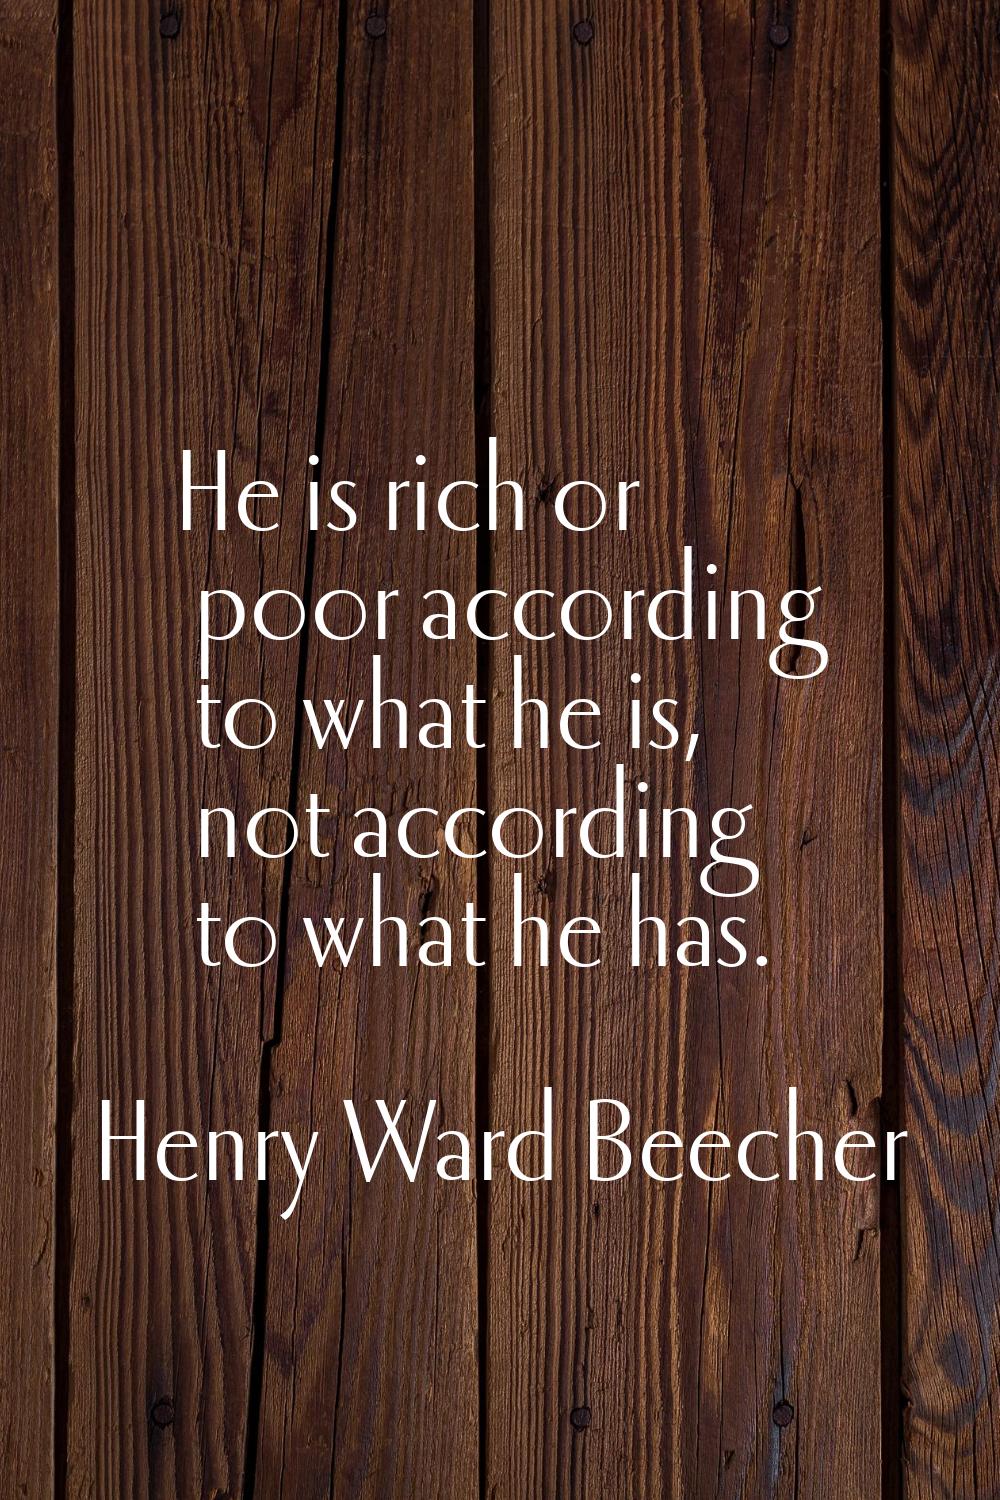 He is rich or poor according to what he is, not according to what he has.